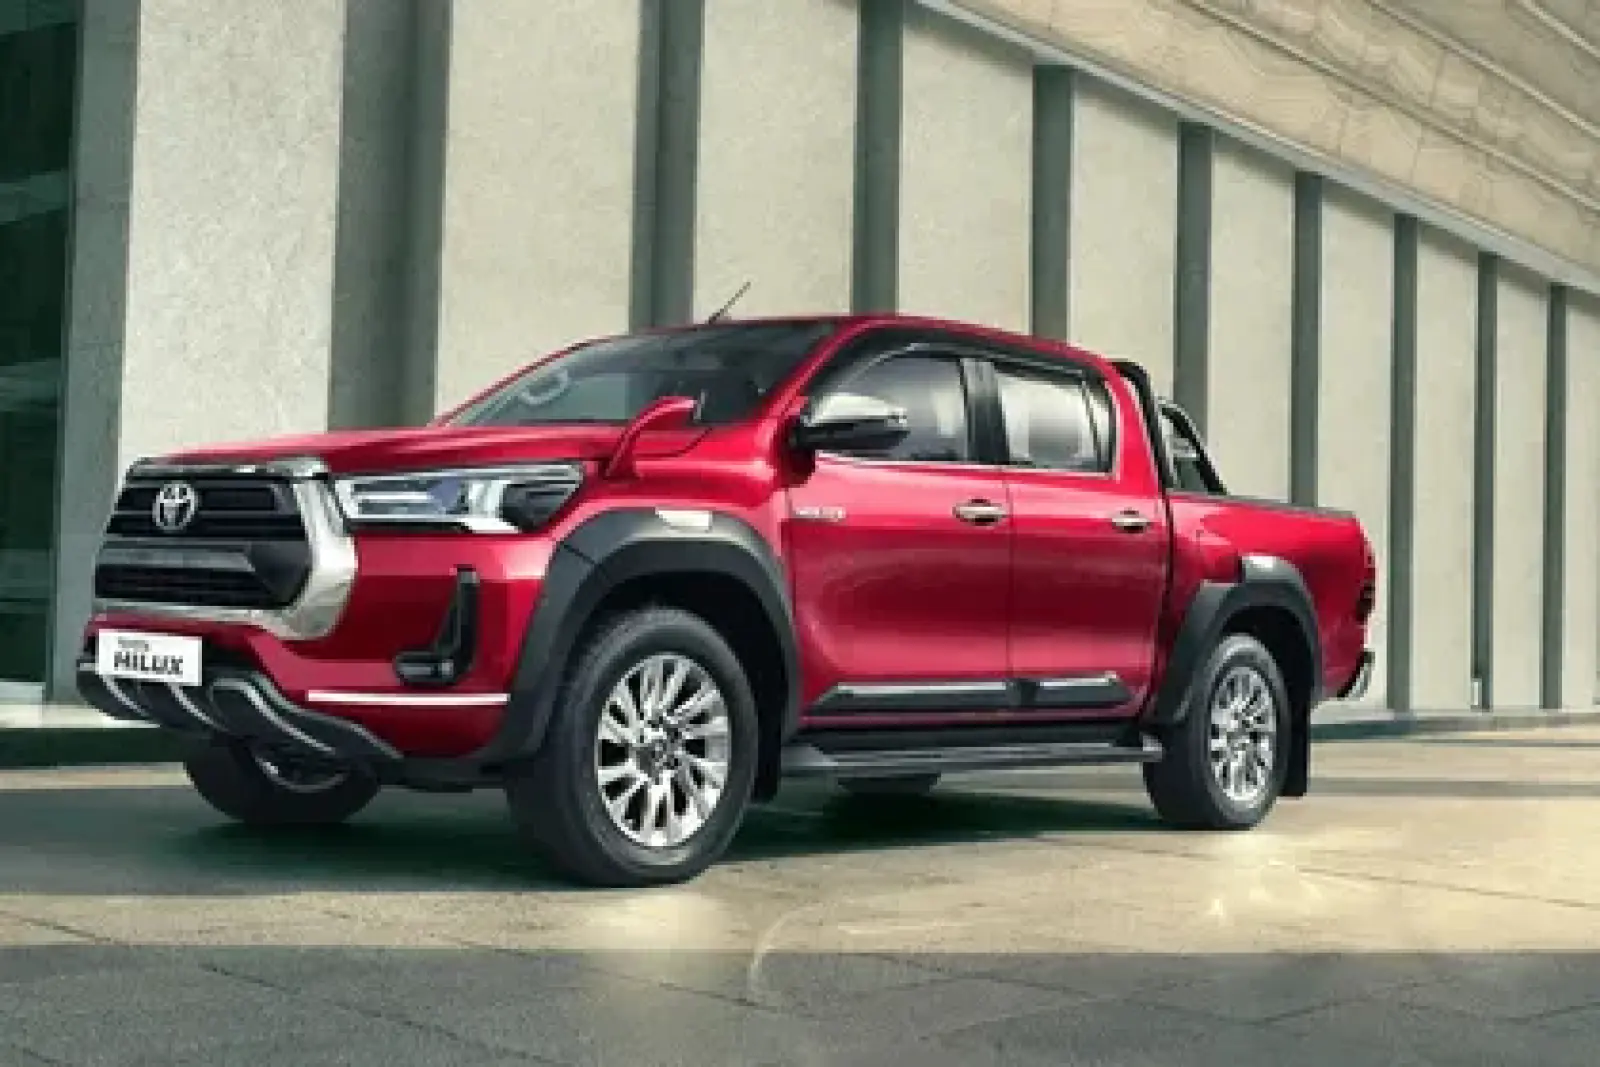 First glimpse of Toyota Hilux Facelift revealed, will be launched with hybrid engine and these changes